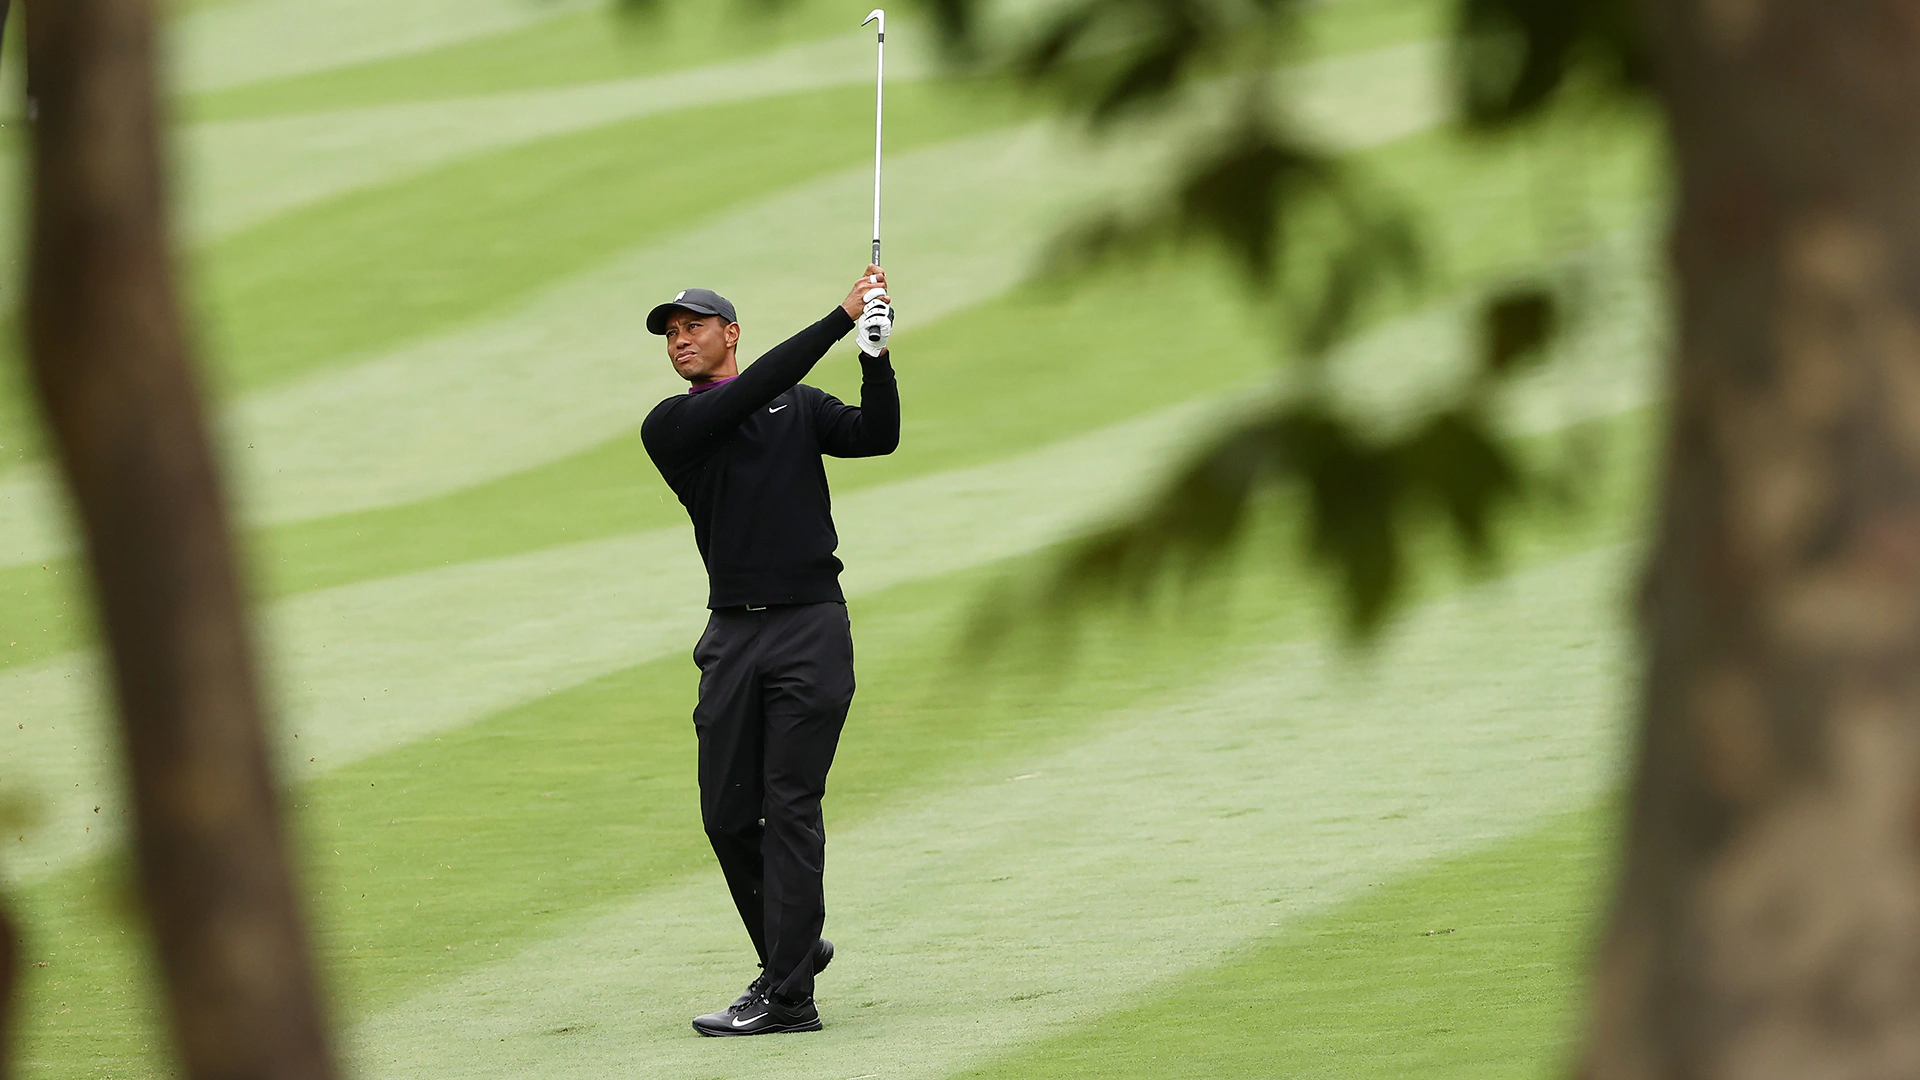 Highlights: Tiger Woods, second round of the Zozo Championship